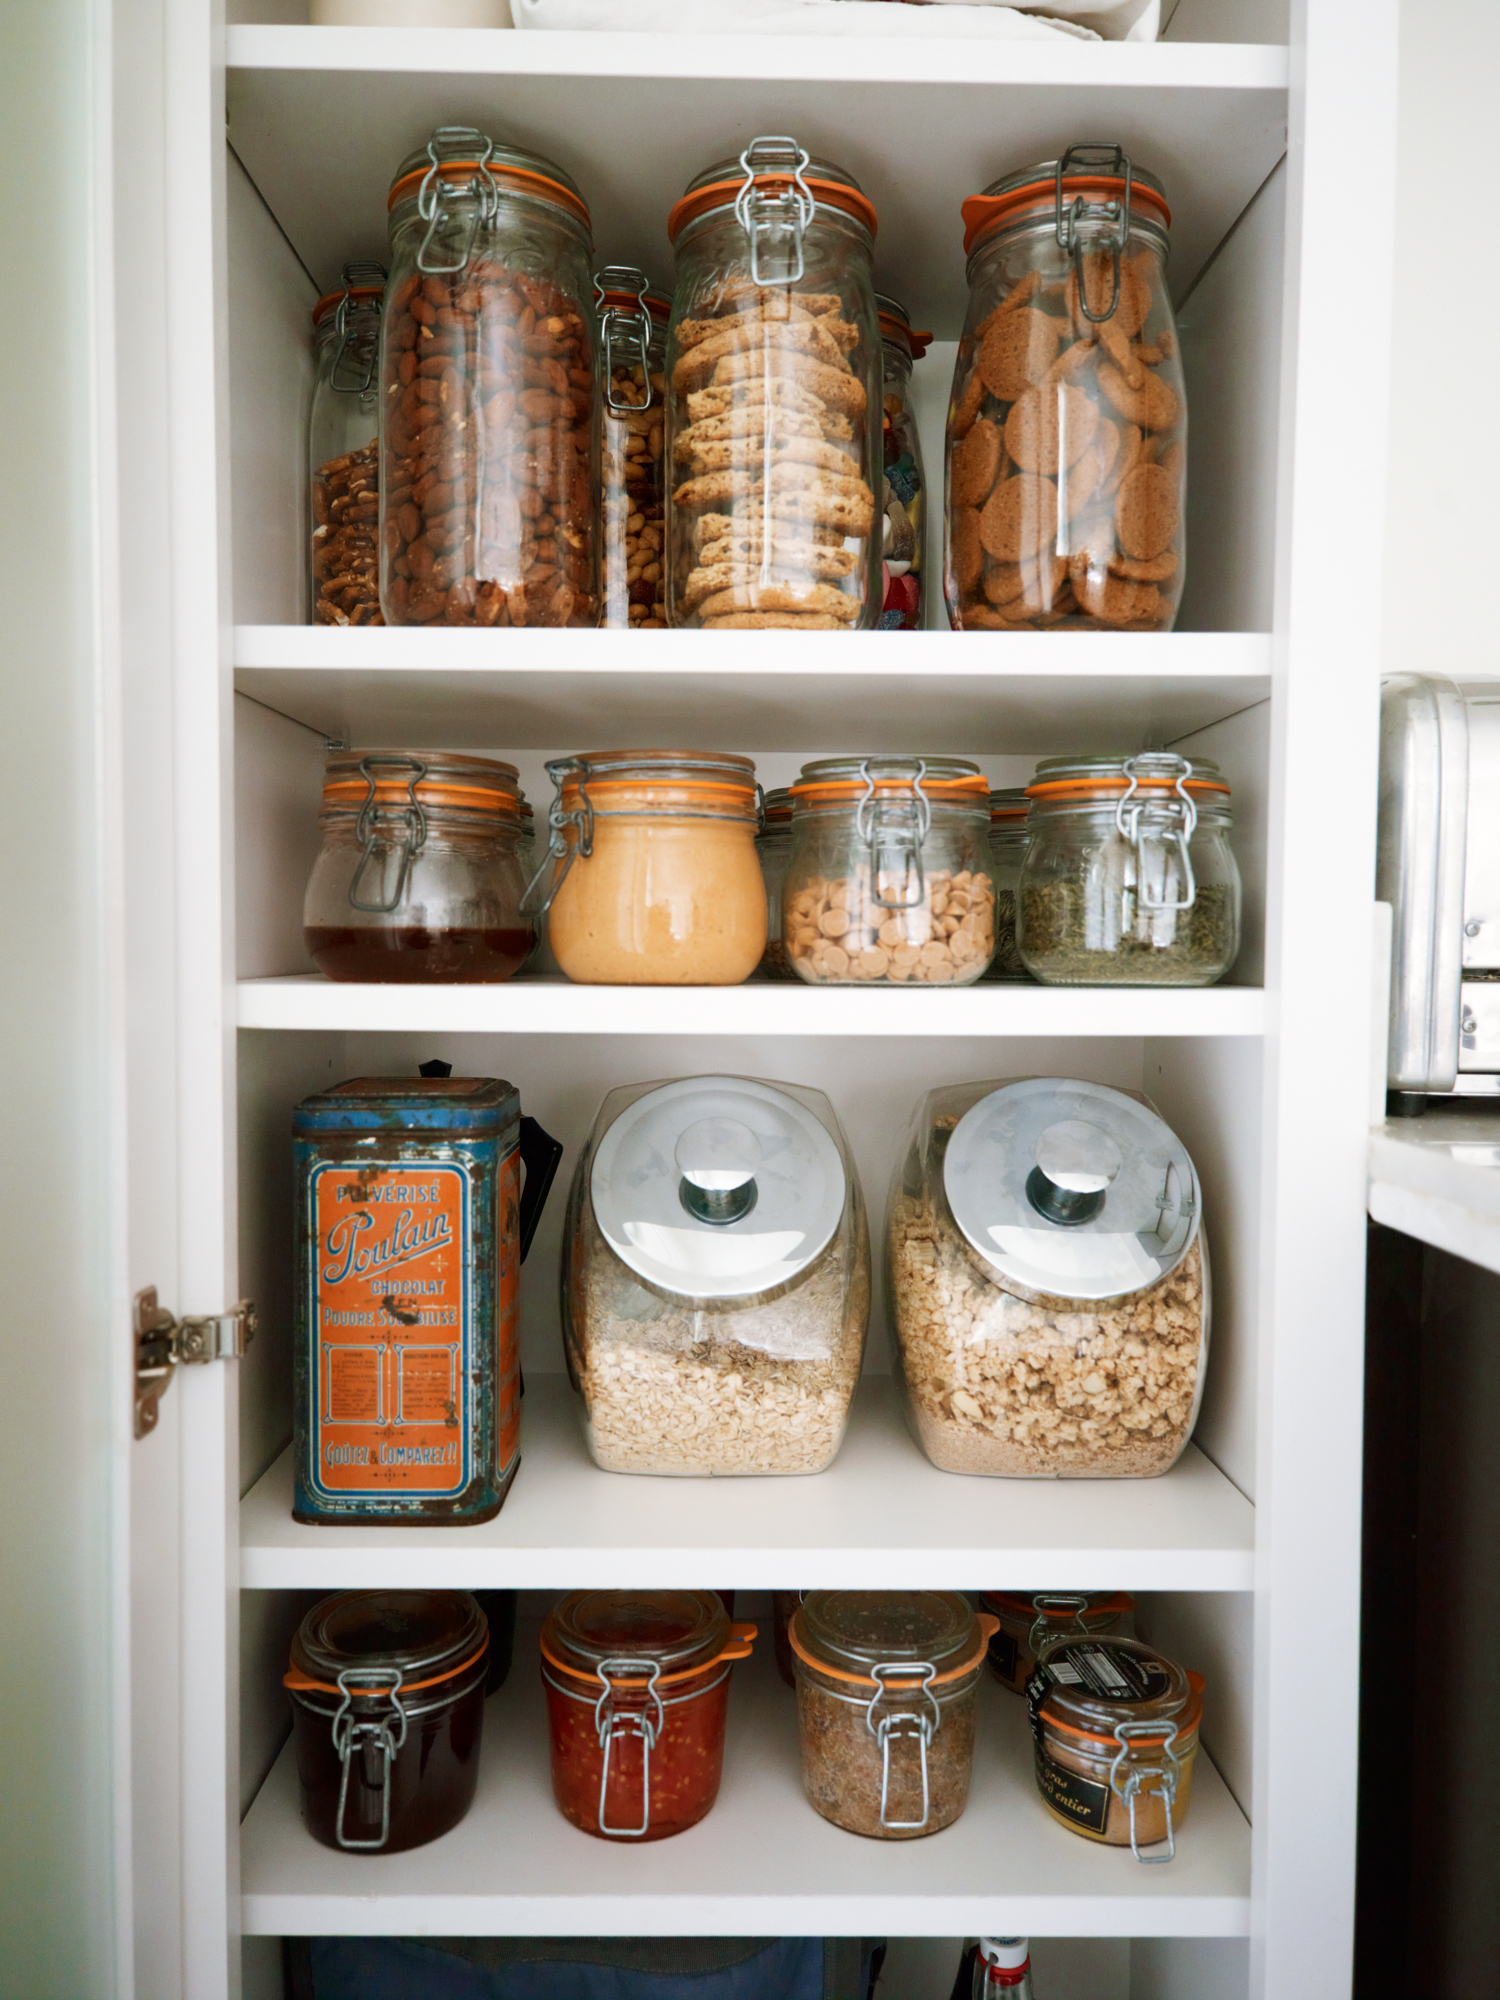 Zero-Waste Tips: Make Your Own Pantry Items